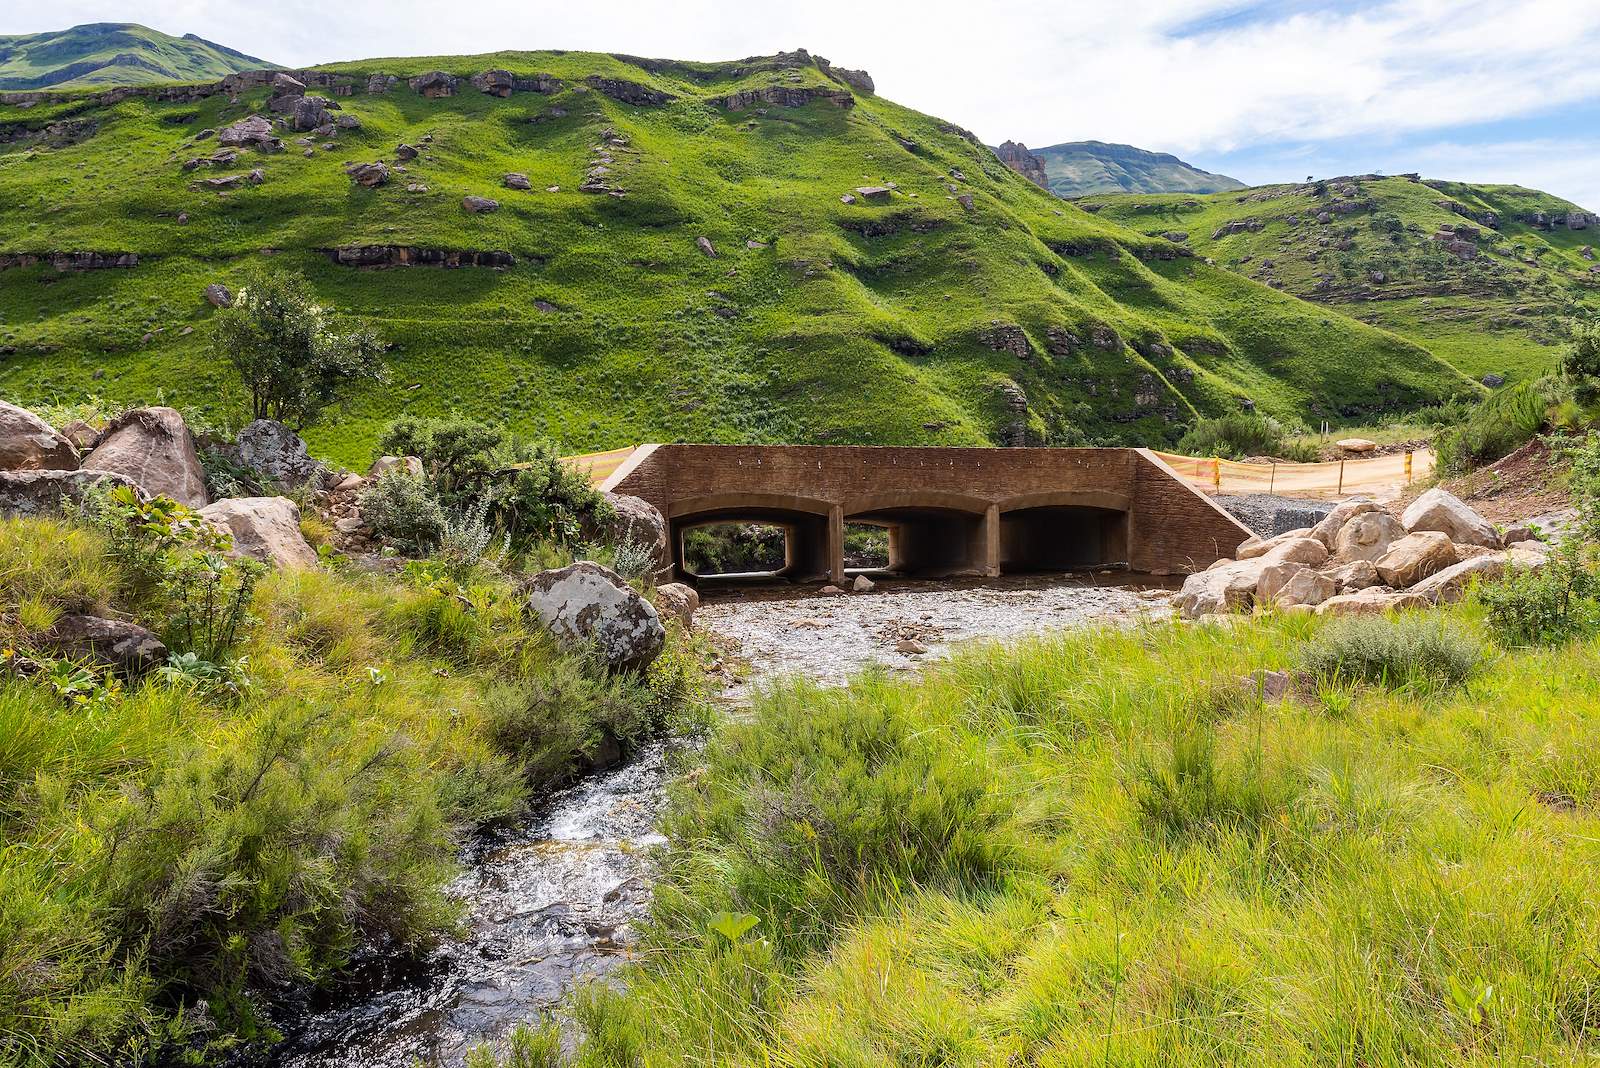 Sani Pass: the road link between KwaZulu-Natal and Lesotho, South Africa